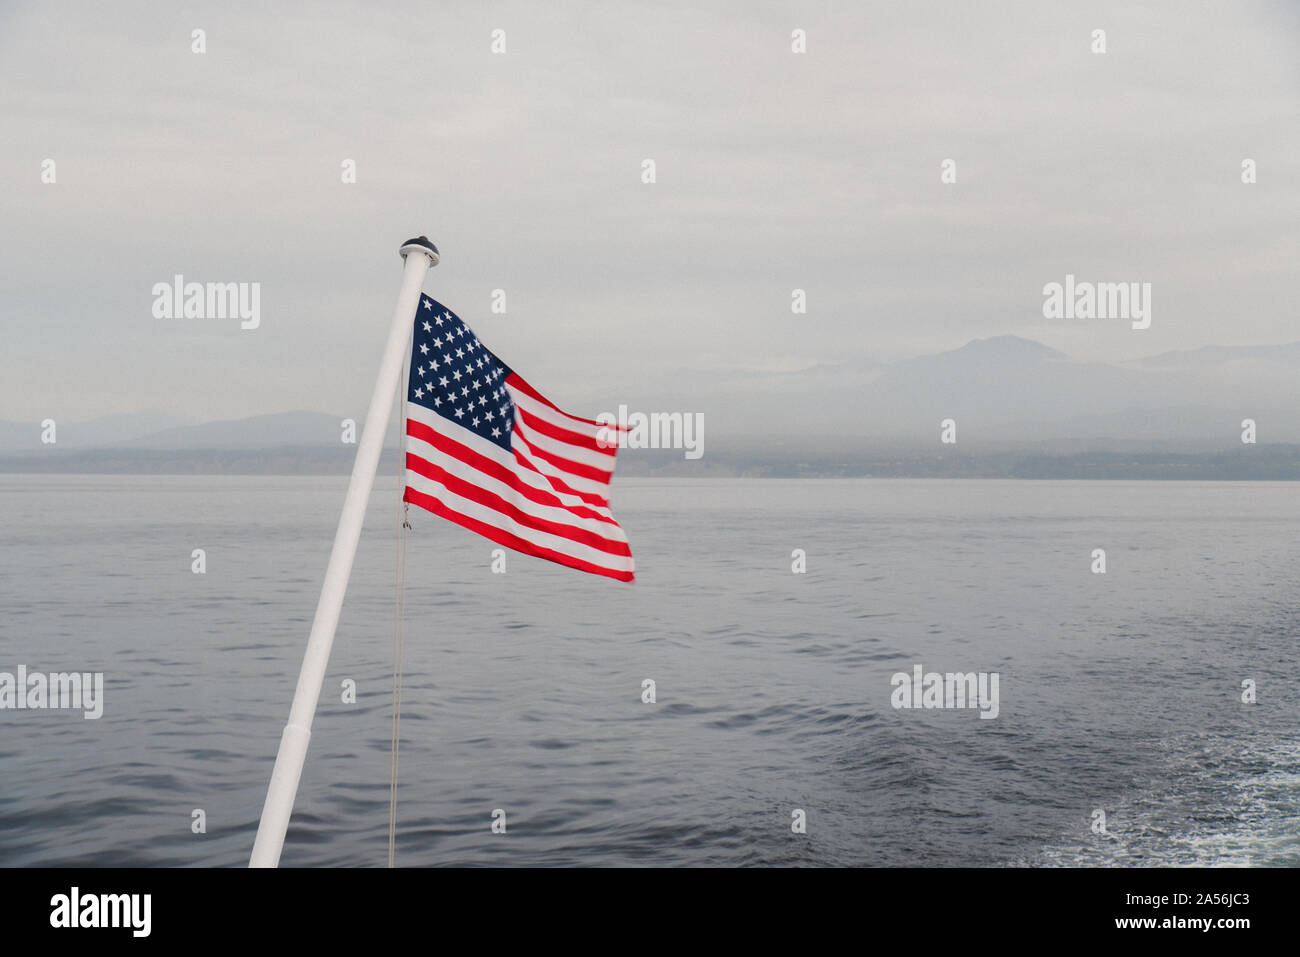 American flag on the waterways Stock Photo